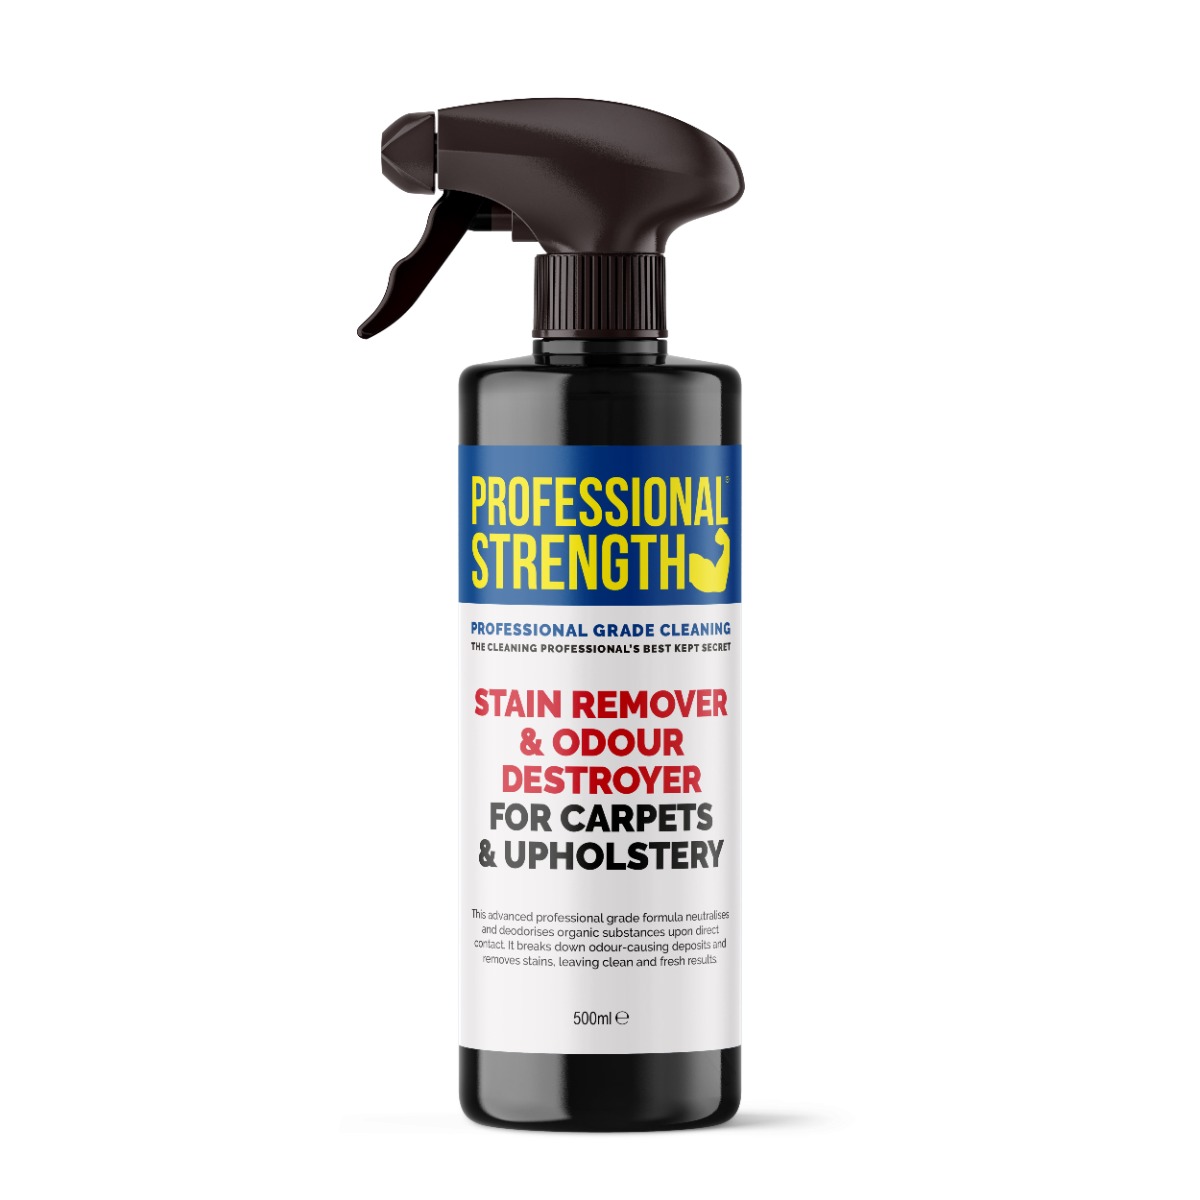 Professional Strength Stain Remover & Odour Destroyer | StressNoMore